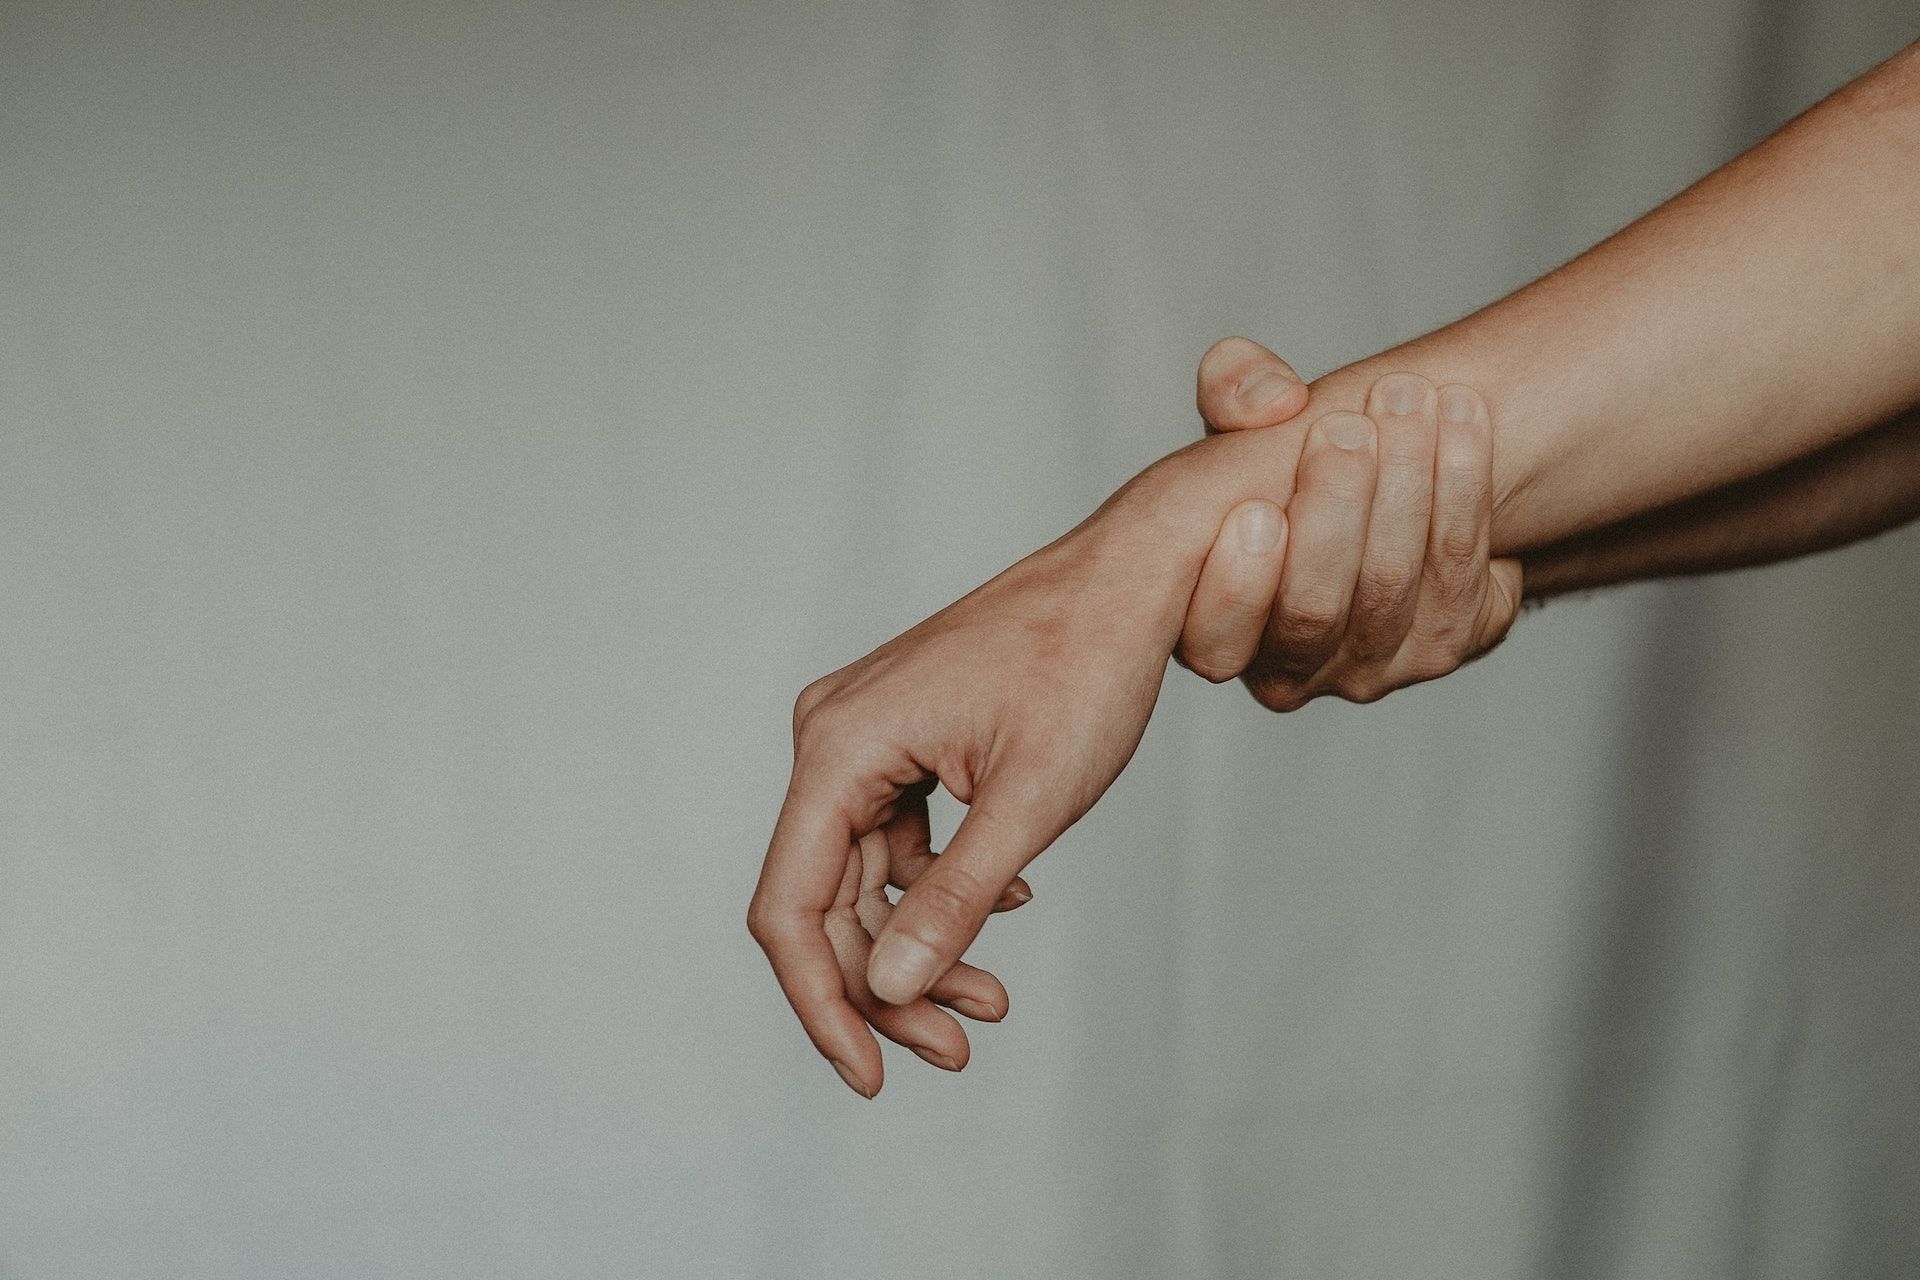 Wrist rotation can relieve carpal tunnel syndrome. (Photo via Pexels/Anete Lusina)